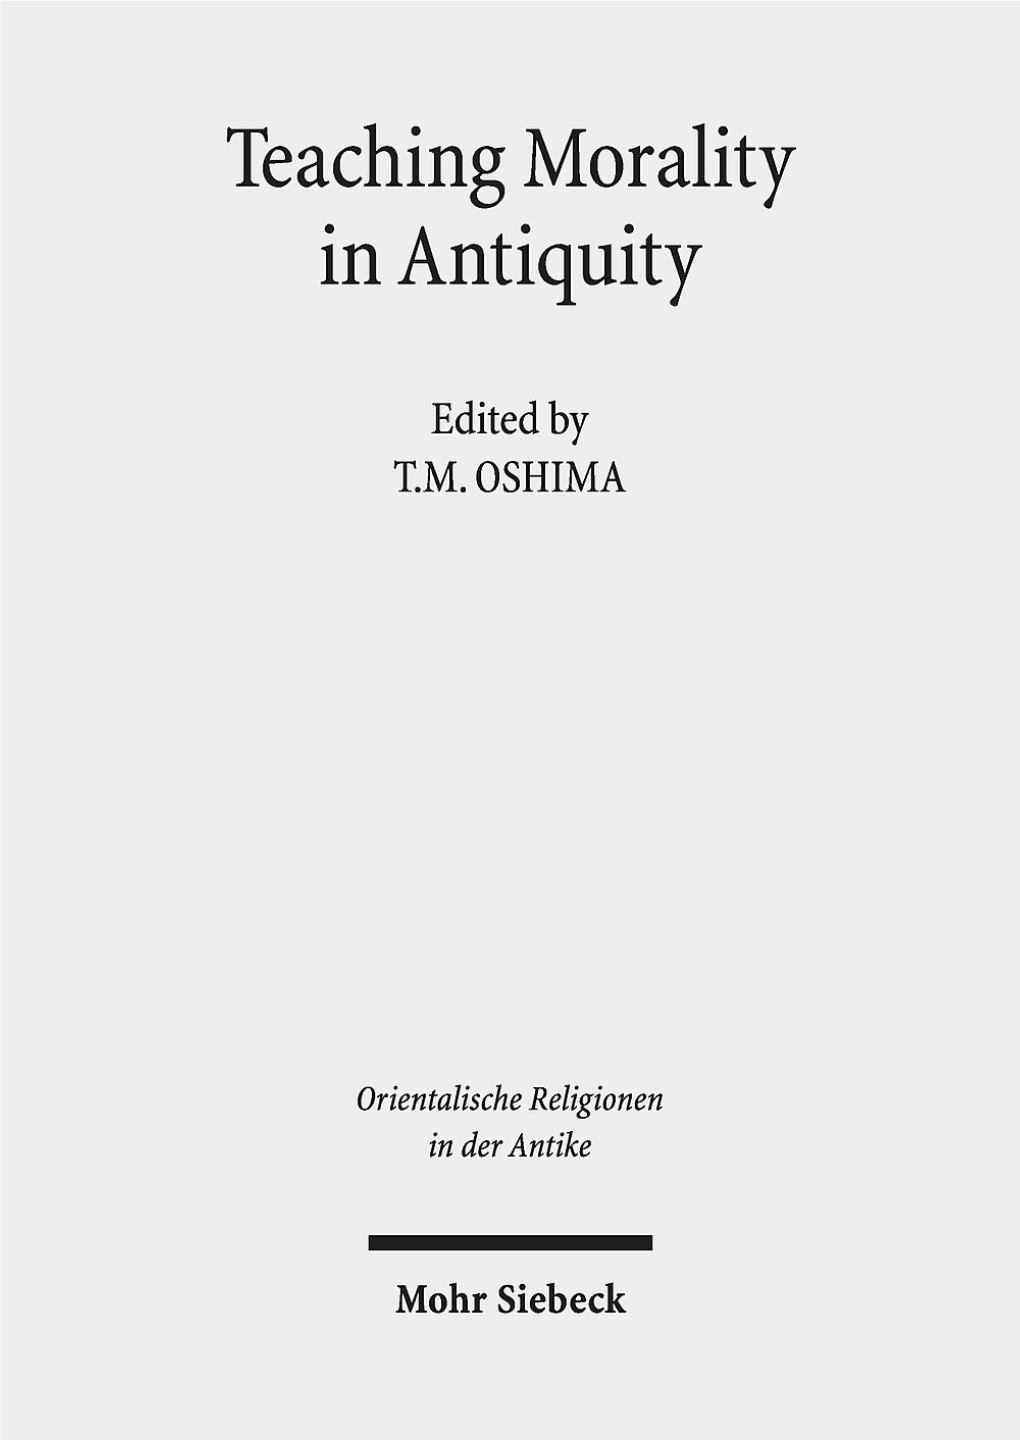 Teaching Morality in Antiquity